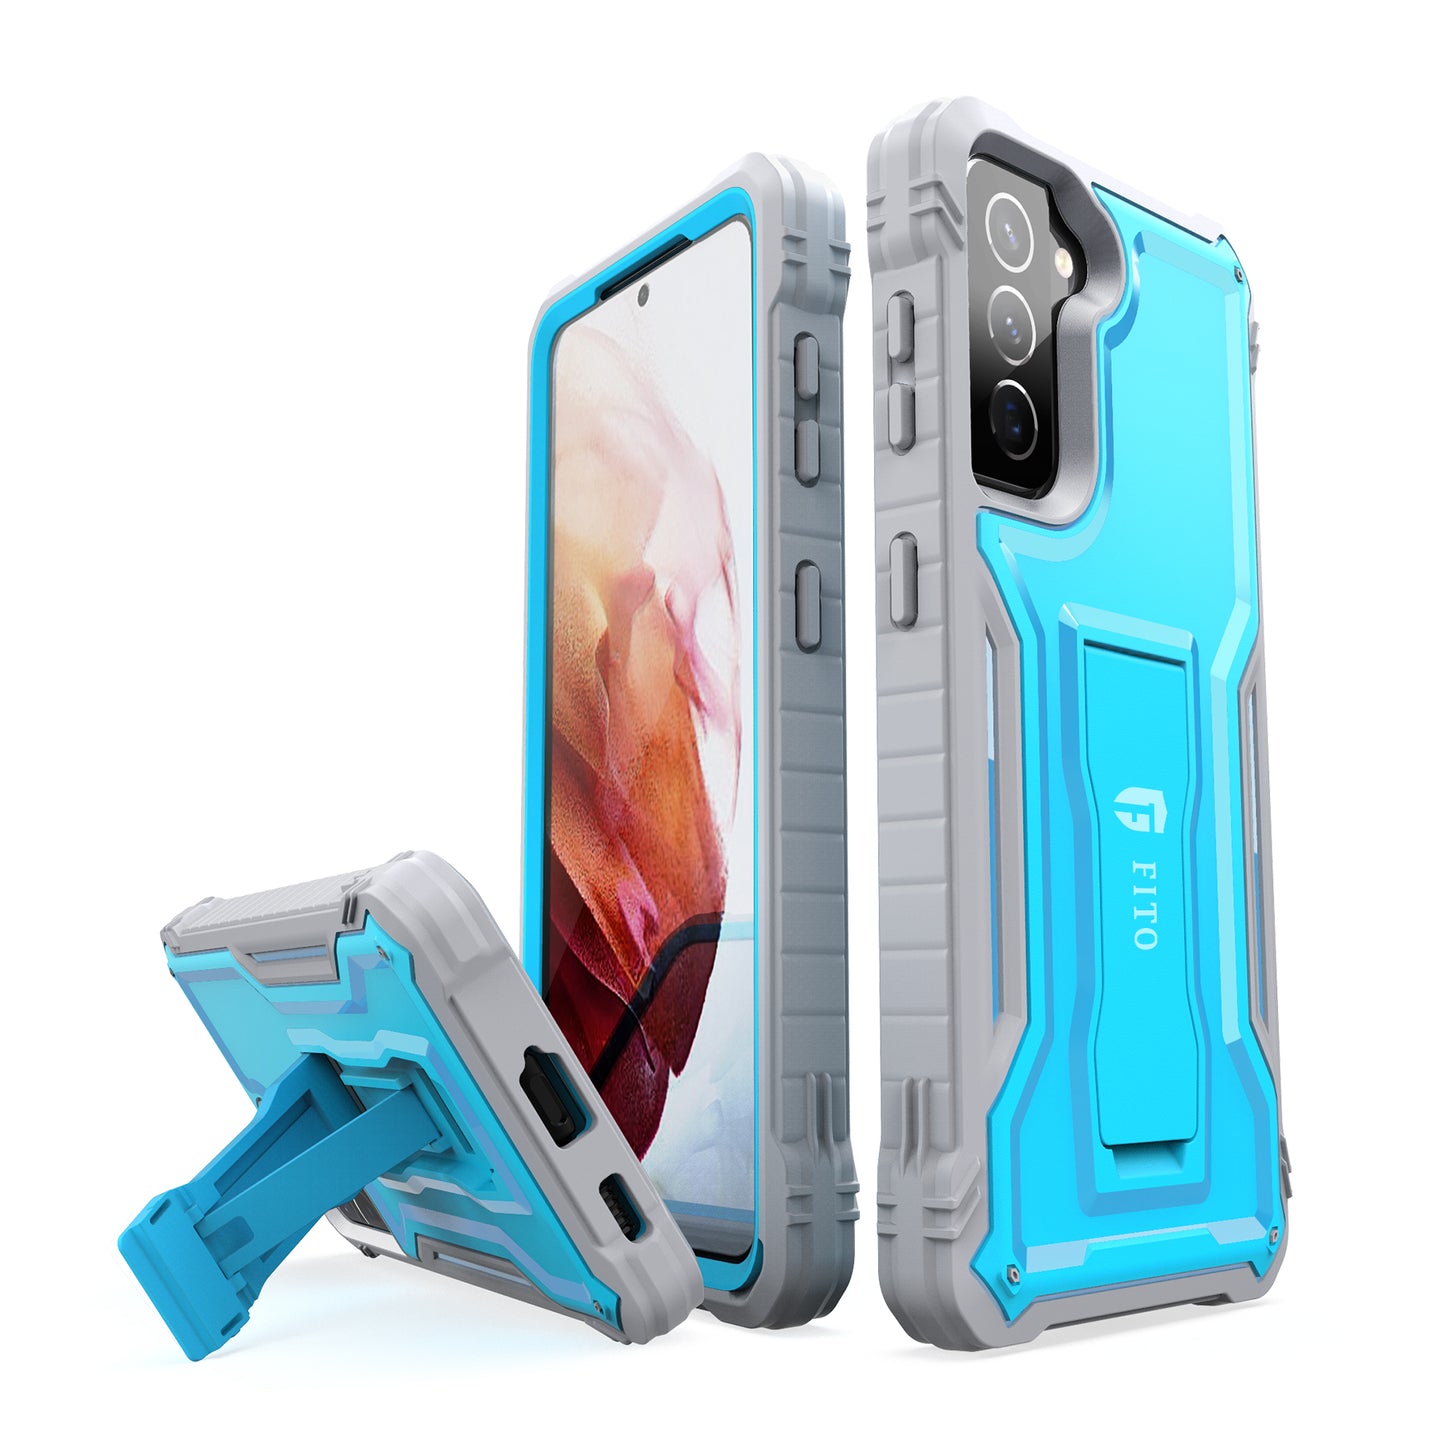 FITO for Samsung Galaxy S21 5G Case, Dual Layer Shockproof Heavy Duty Case for Samsung S21 5G Phone Built-in Kickstand, Without Screen Protector